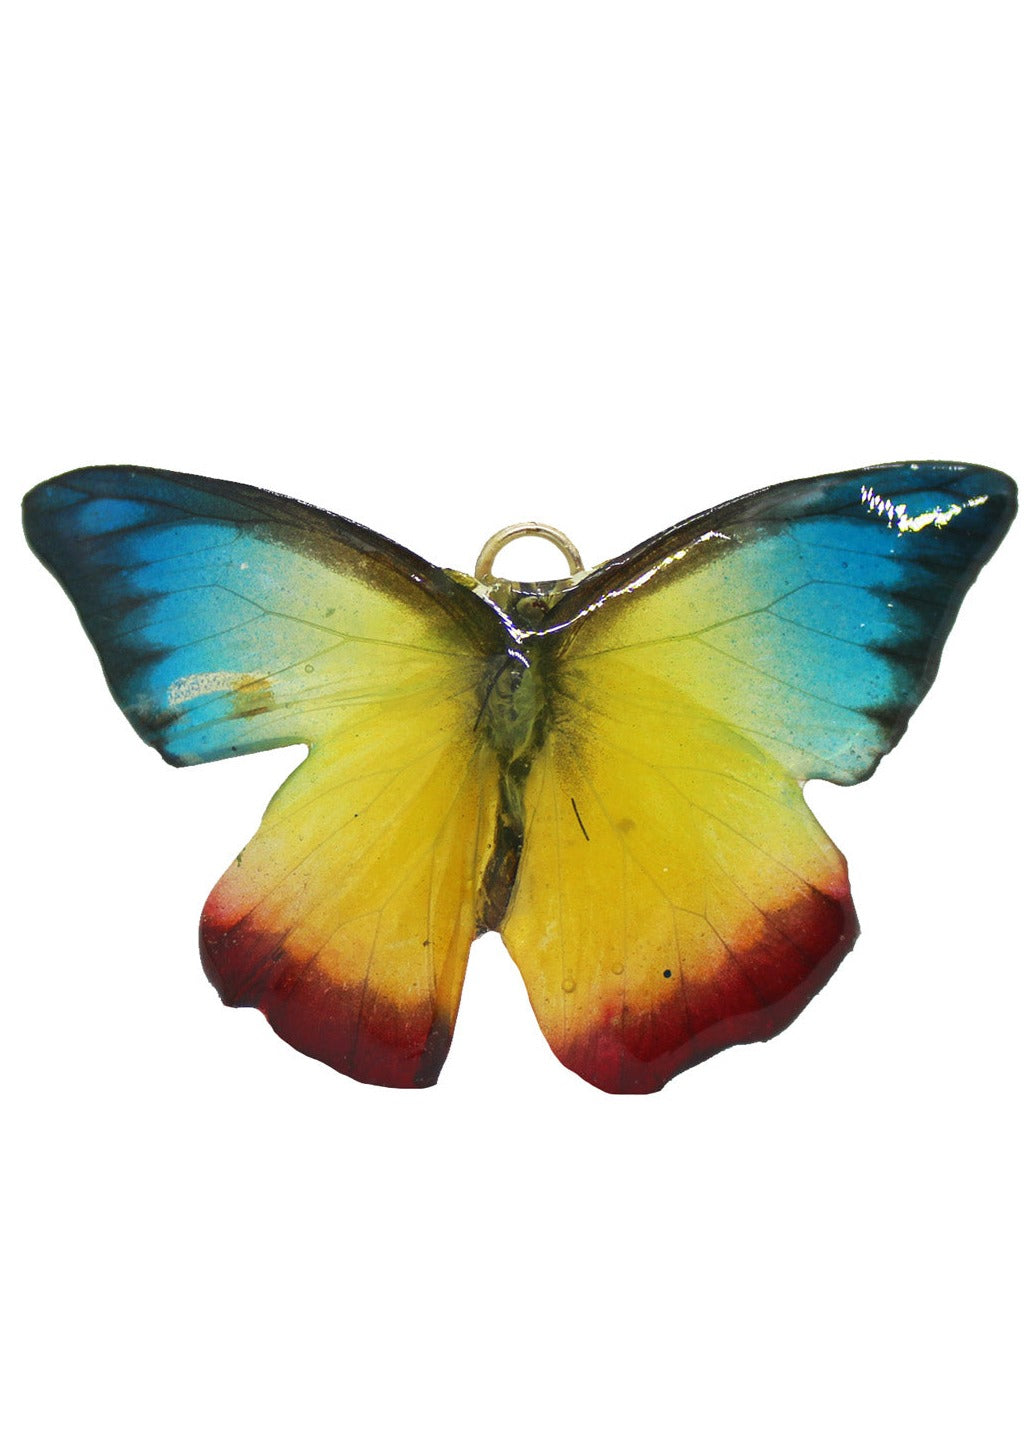 Red, Yellow, Blue, and Black Butterfly preserved in resin.